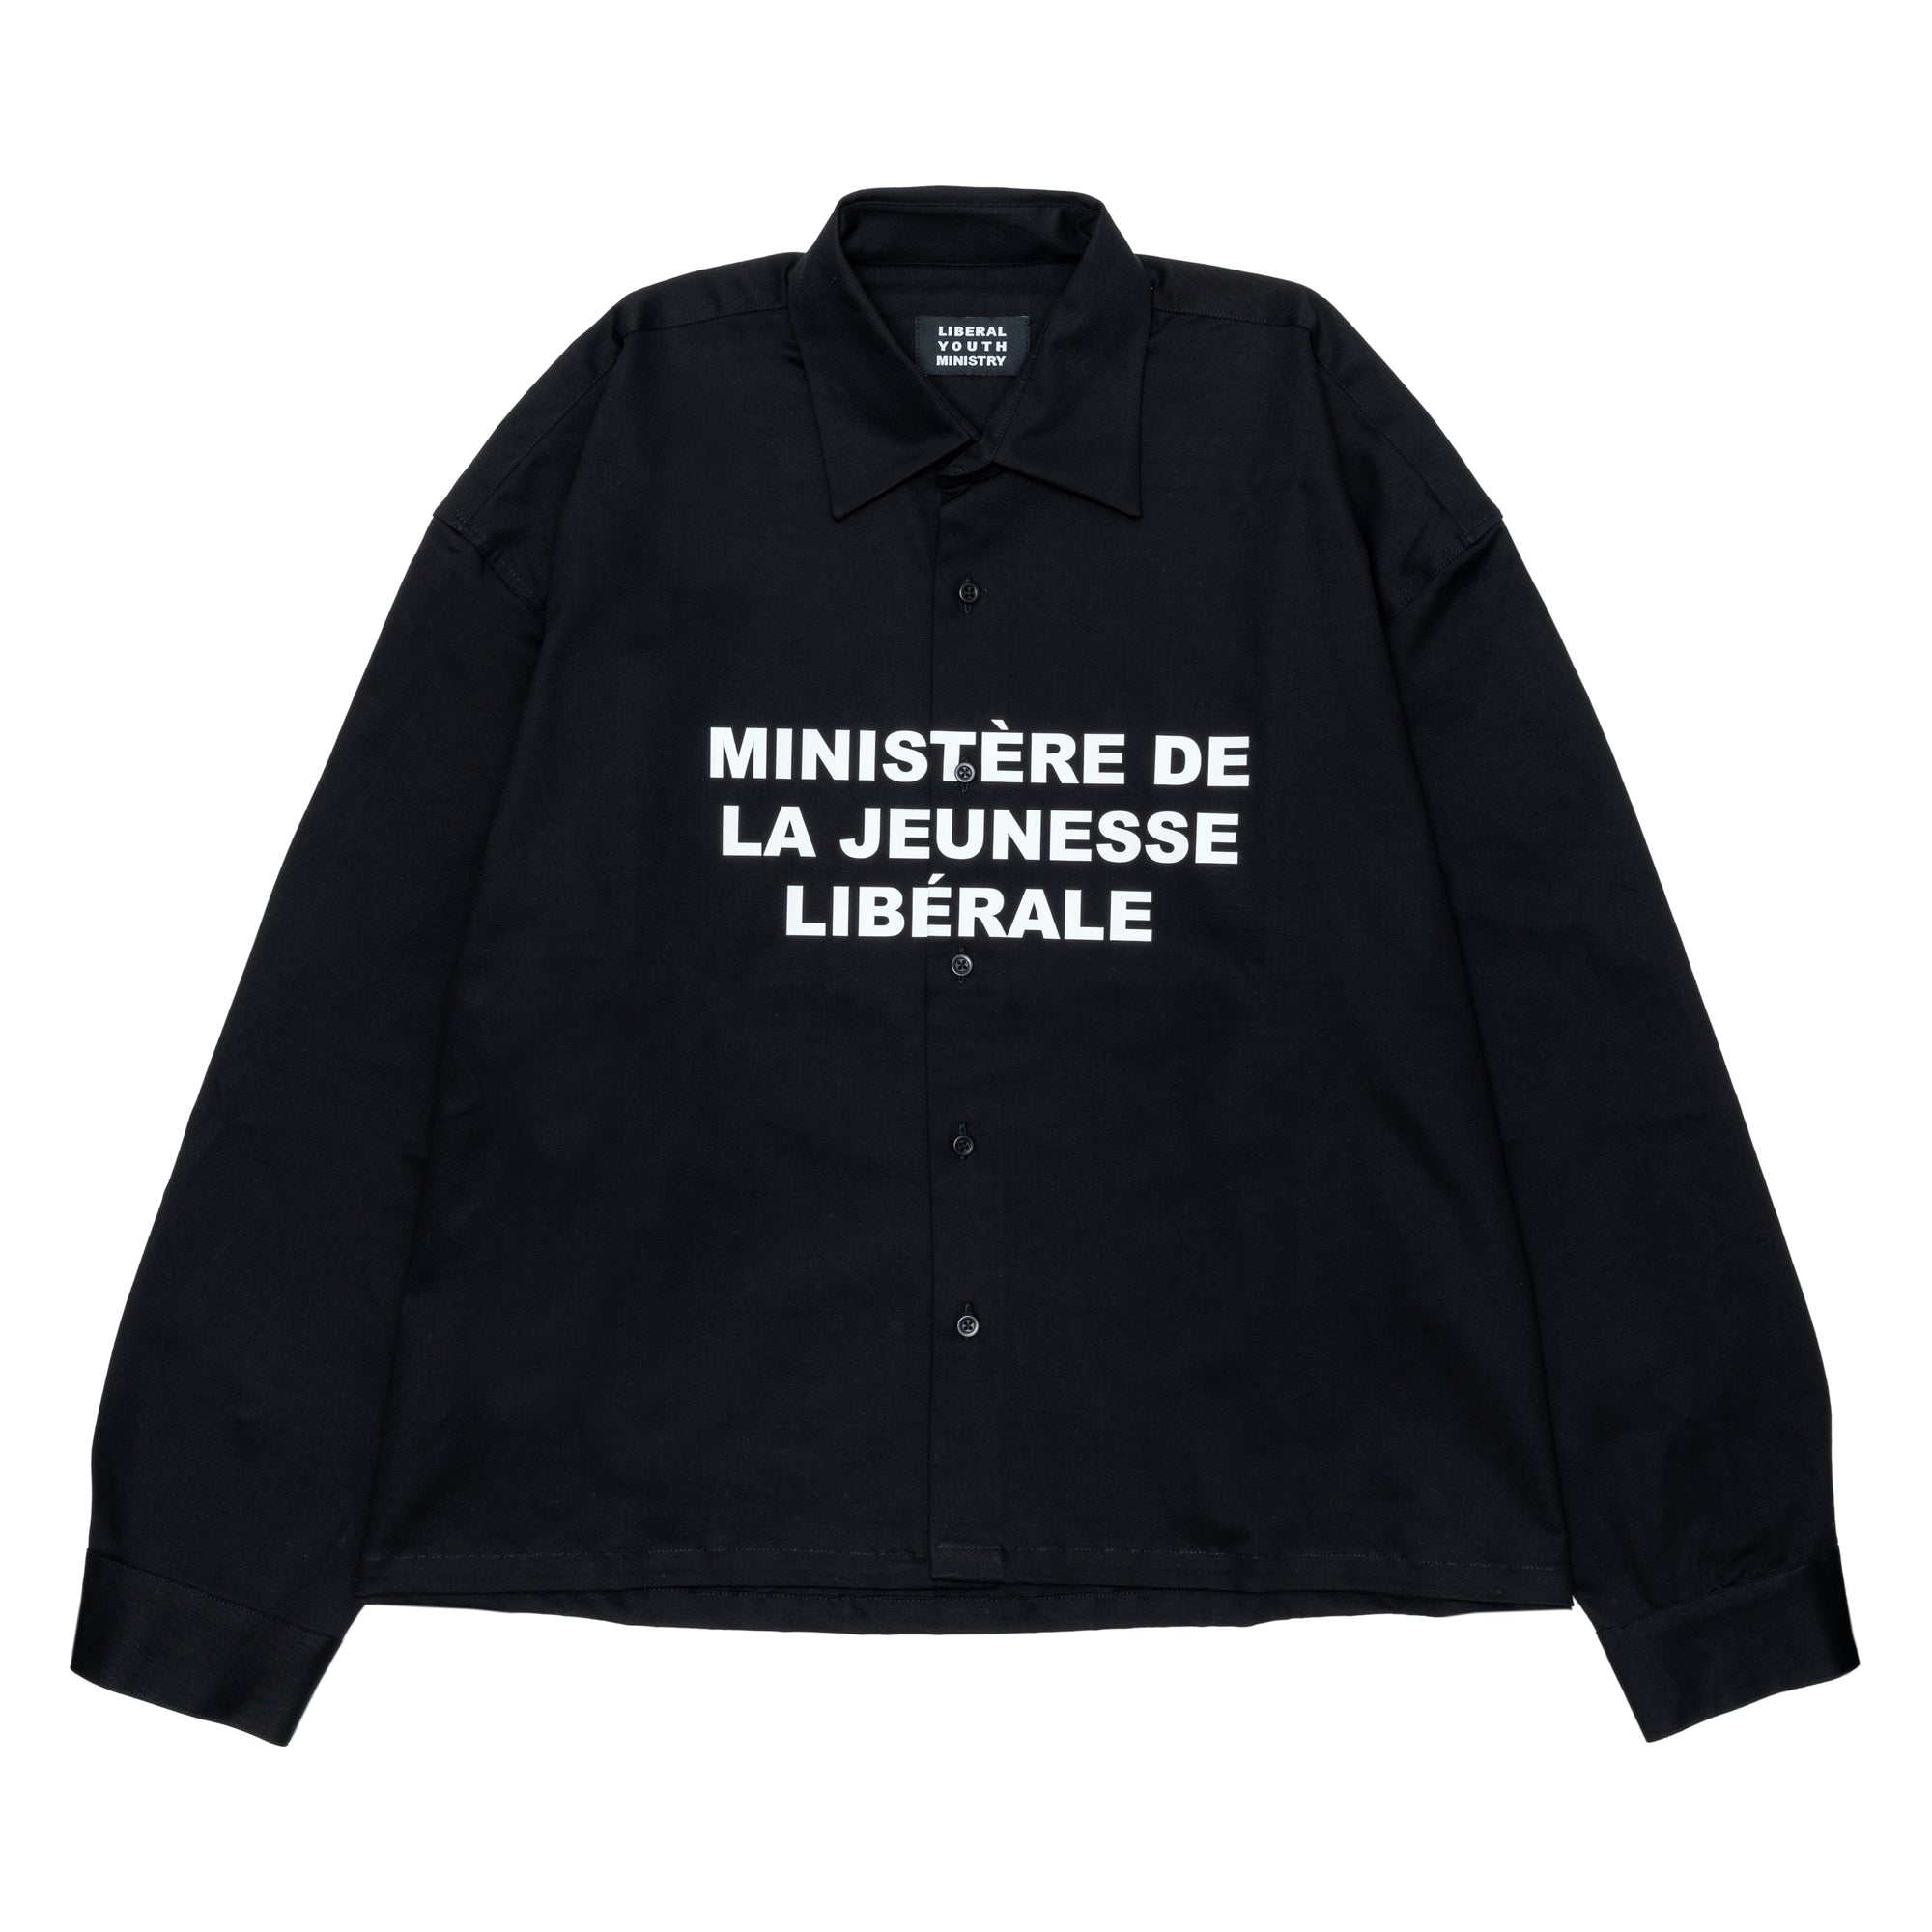 LIBERAL YOUTH MINISTRY - Men Ministere Print Shirt Woven - (Black) view 1